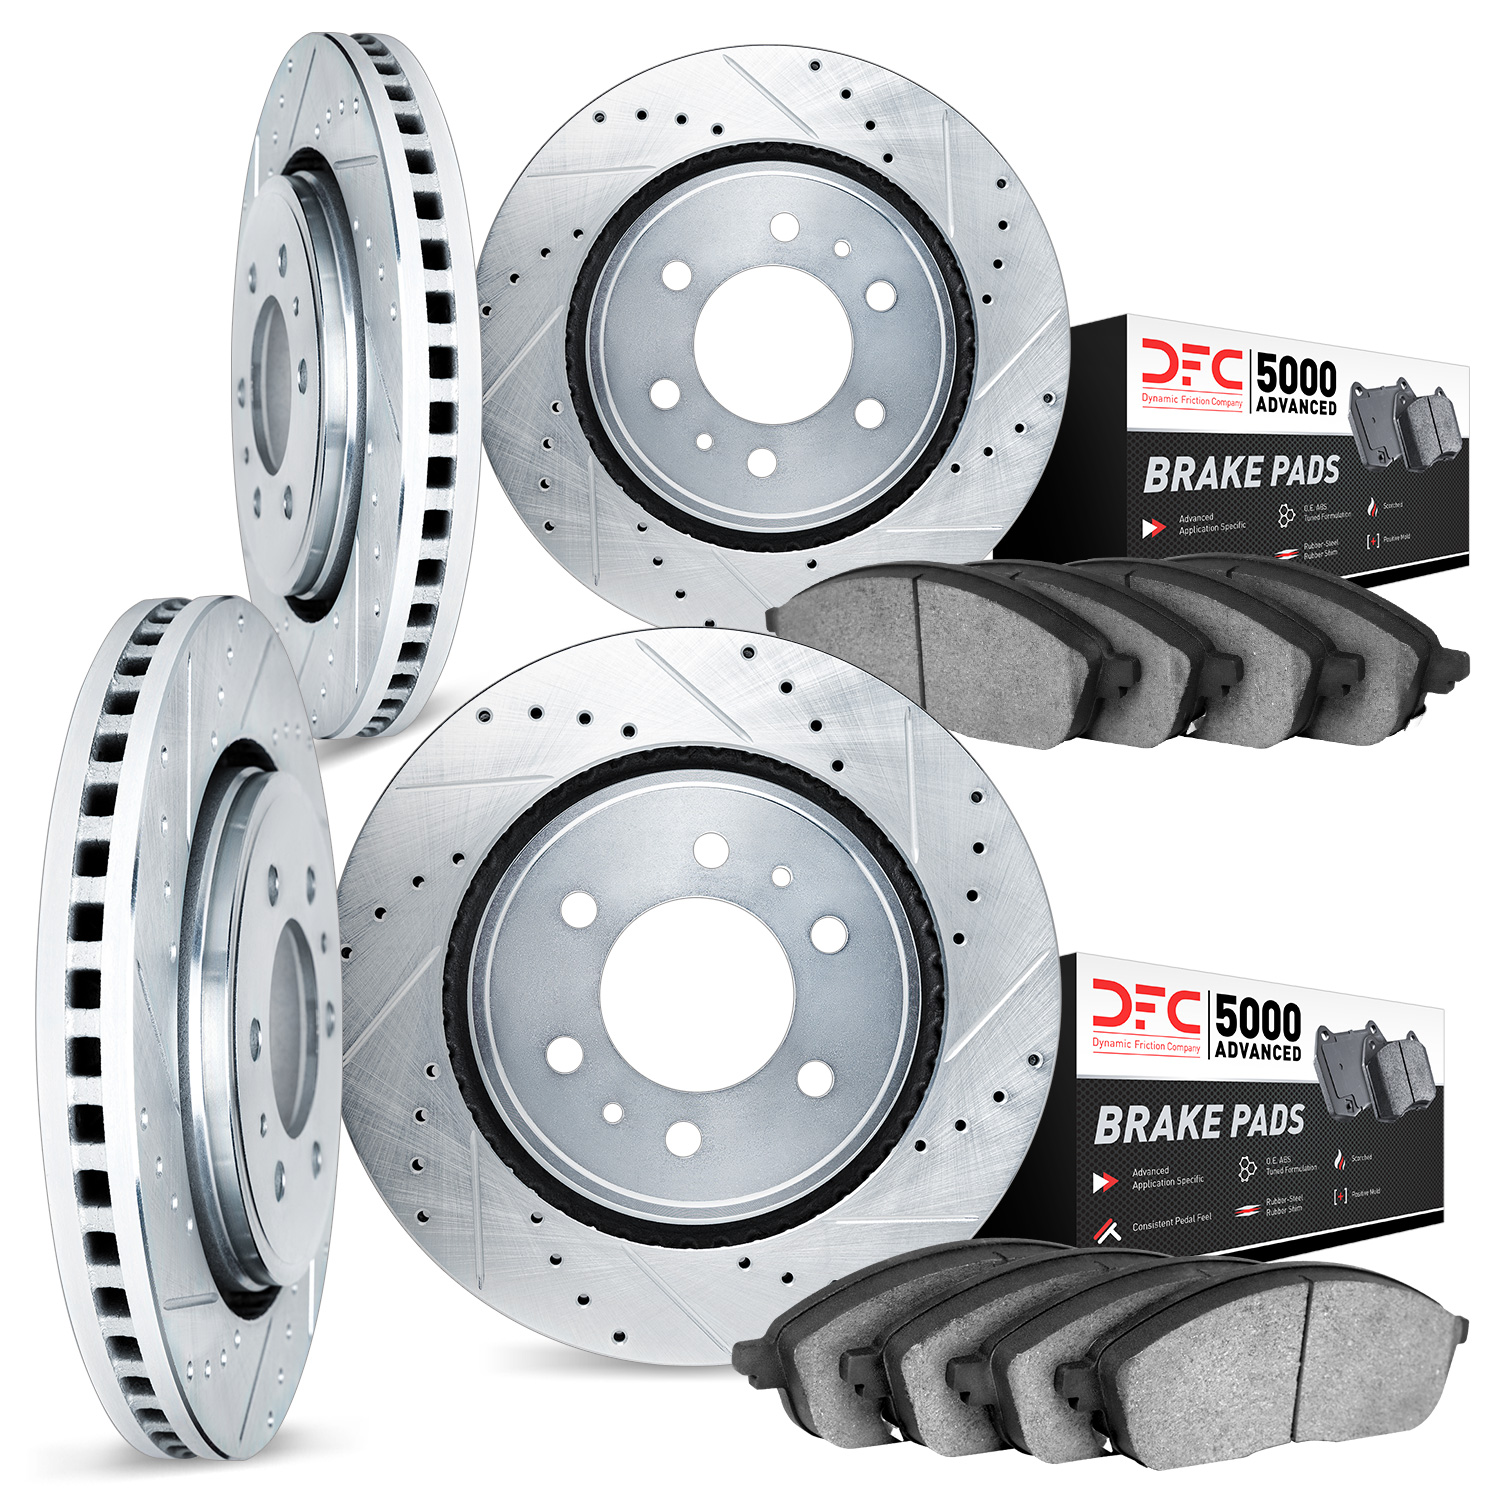 7504-54378 Drilled/Slotted Brake Rotors w/5000 Advanced Brake Pads Kit [Silver], 2018-2020 Ford/Lincoln/Mercury/Mazda, Position: